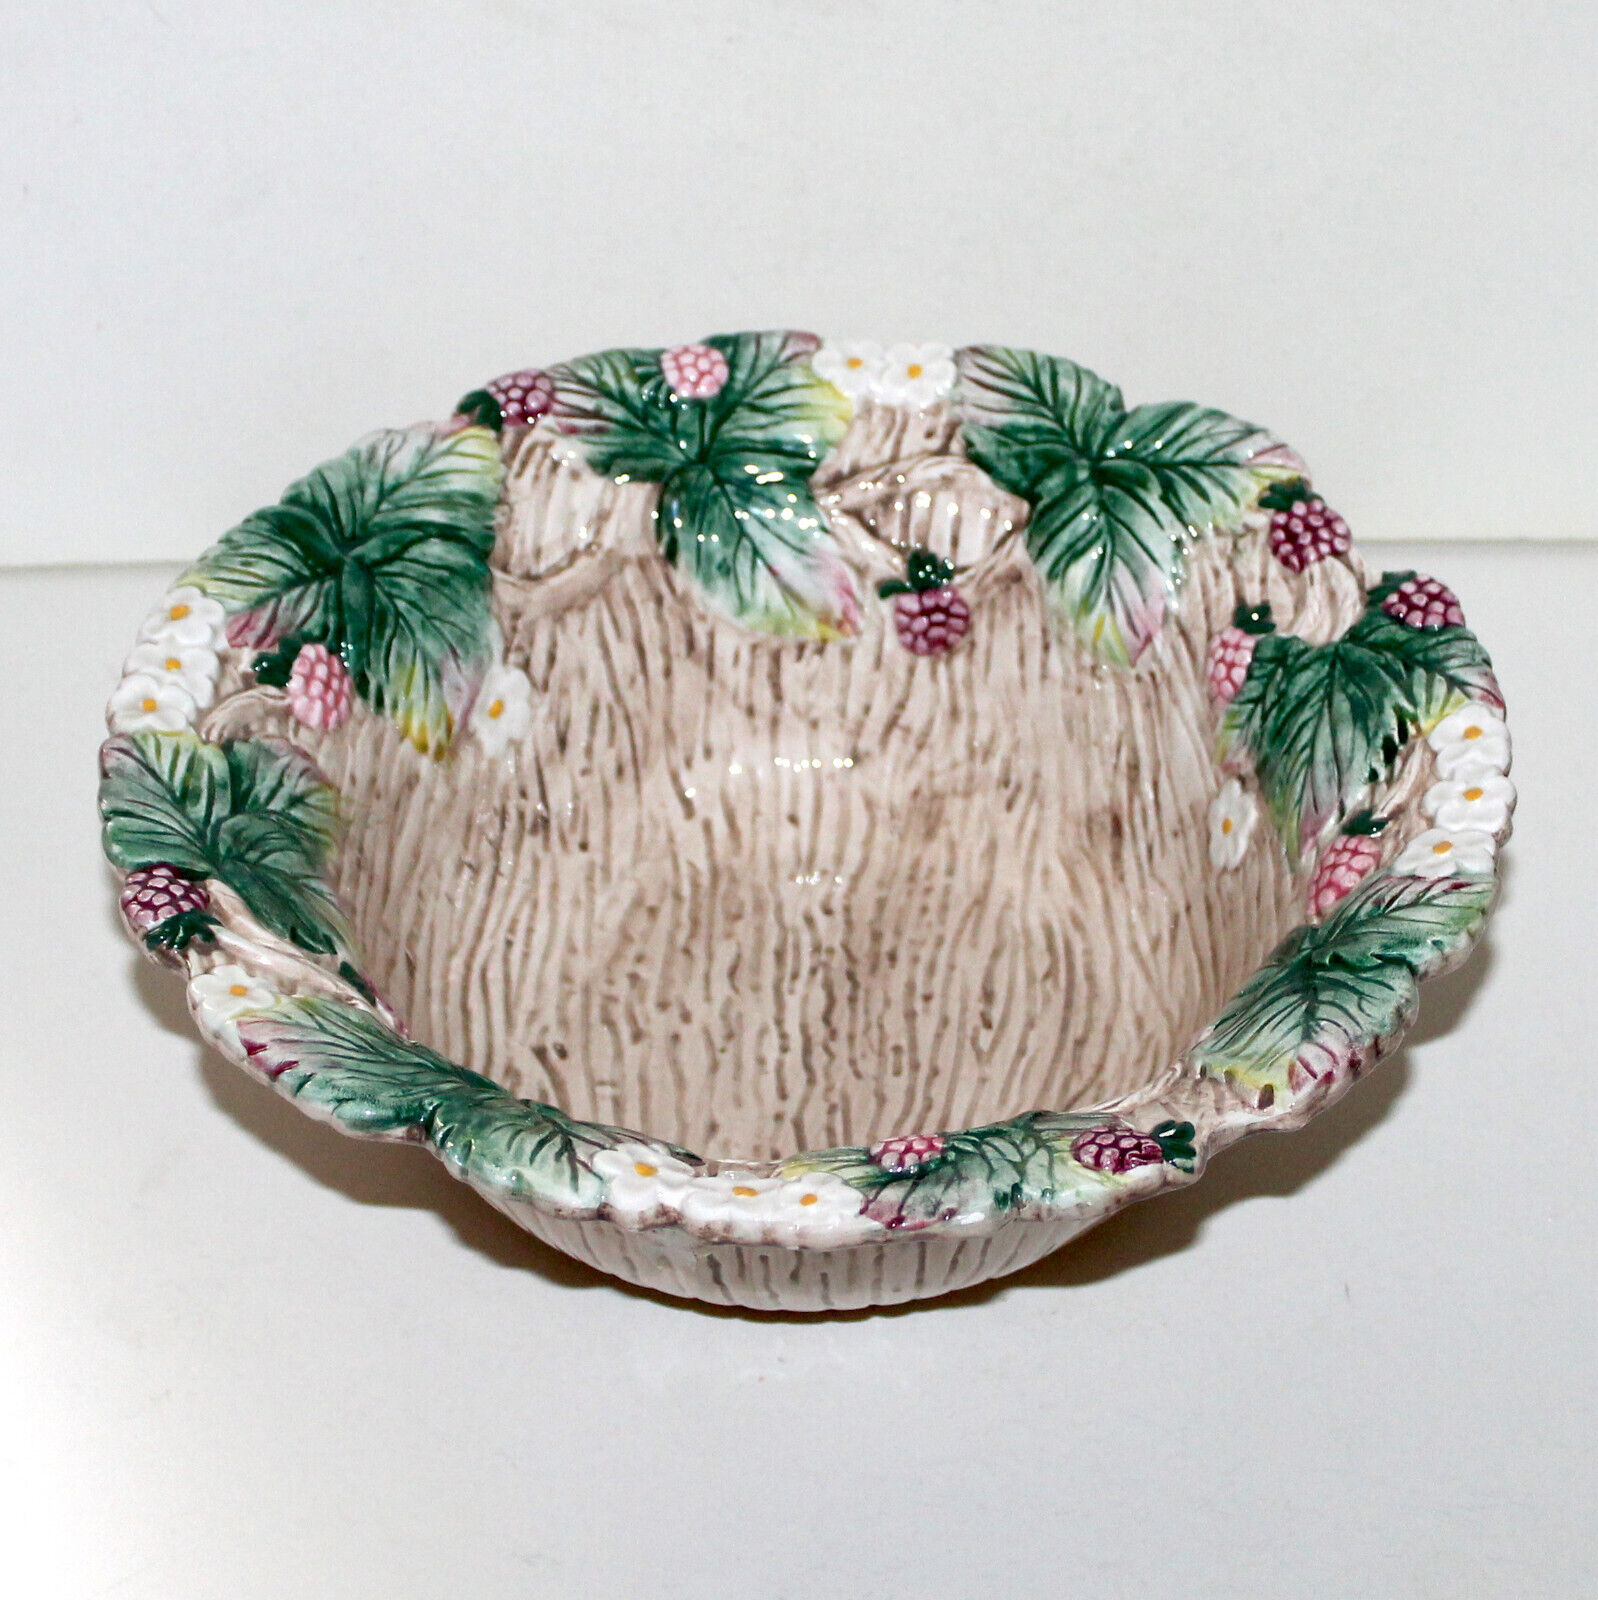 Vintage Fitz and Floyd large ceramic bowl Wild Berries china table decor